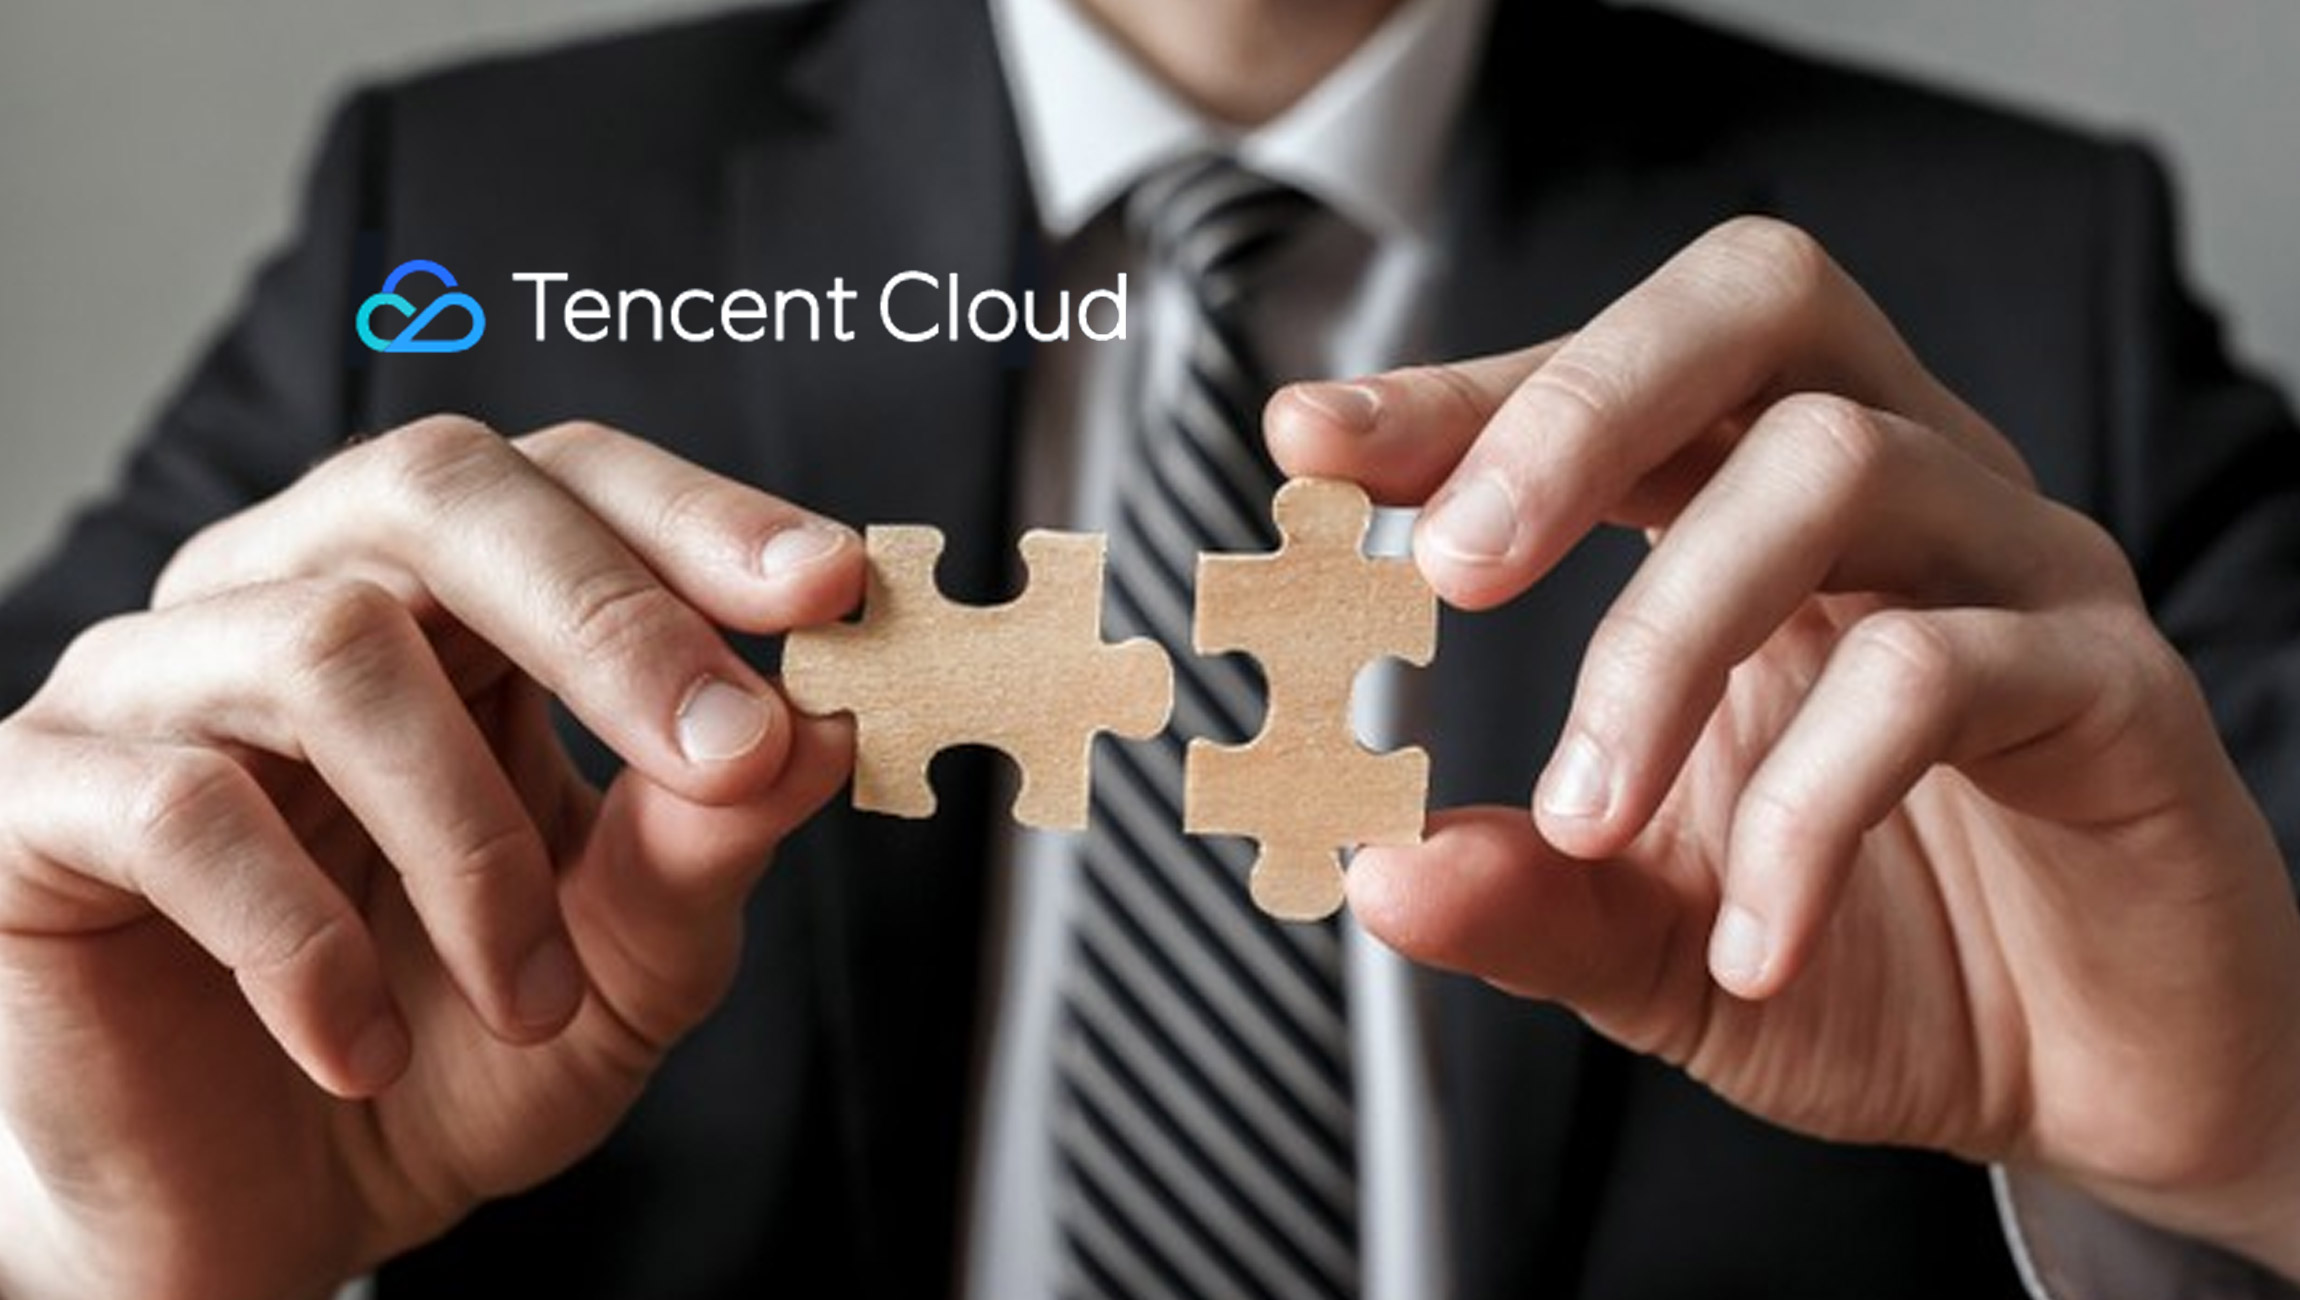 Tencent Cloud Enters into Strategic Collaboration with Traac to Provide Cloud Solutions and Services in Europe